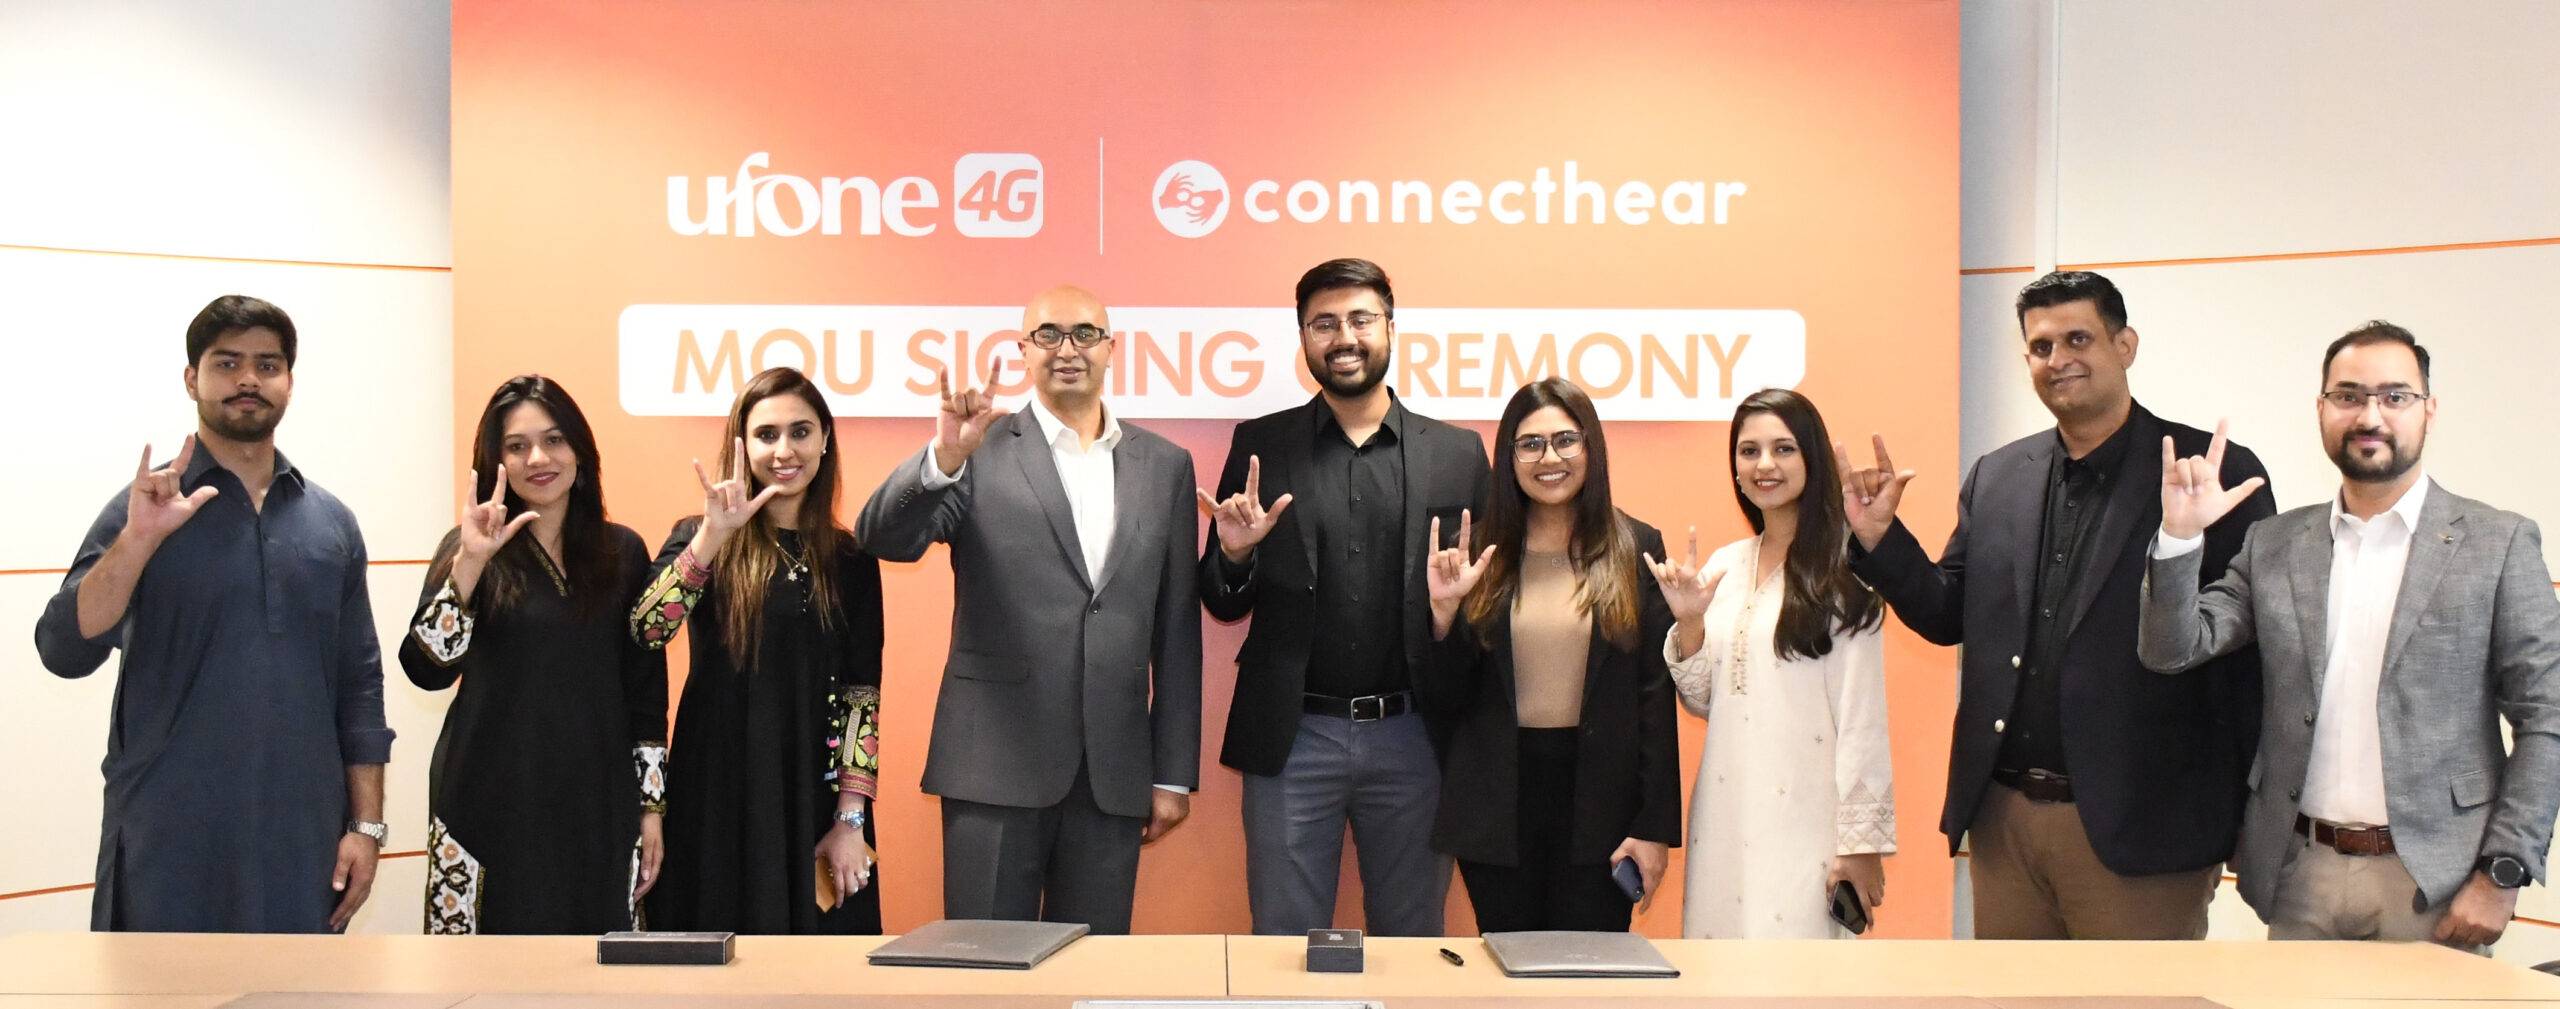 Ufone 4G, ConnectHear join hands to enable easy accessibility for the Deaf Community in Pakistan